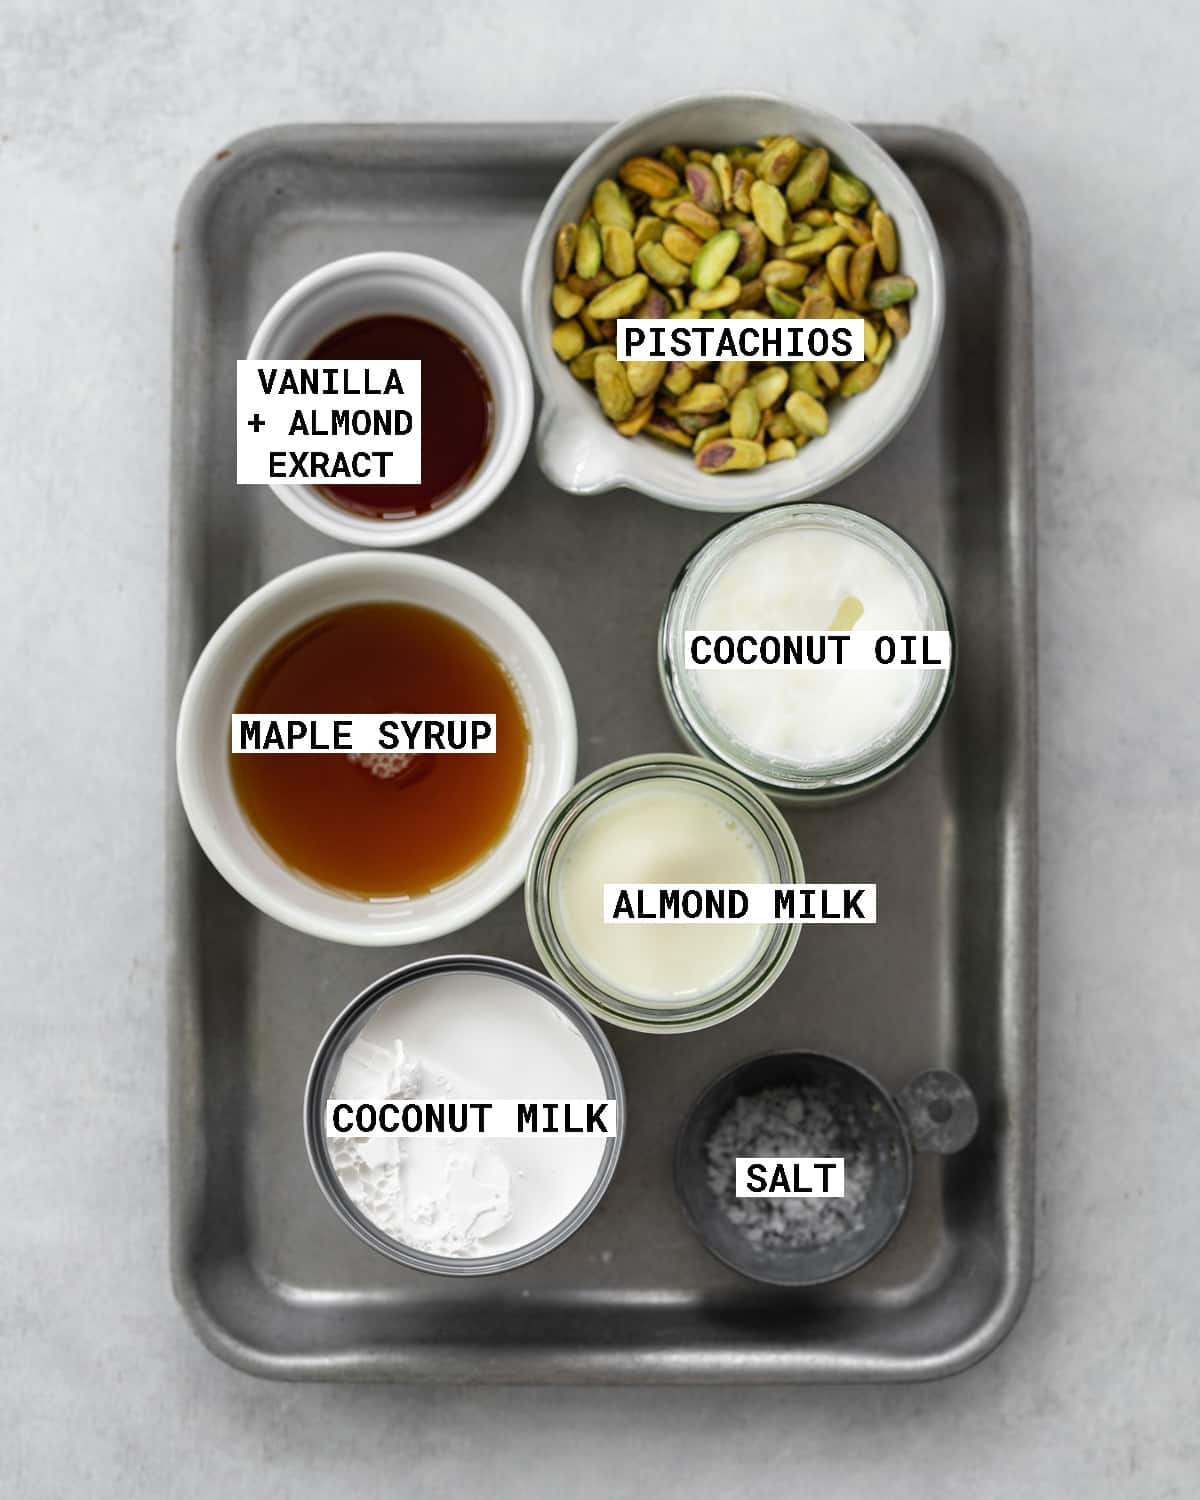 ingredients to make dairy free pistachio ice cream on a metal tray.